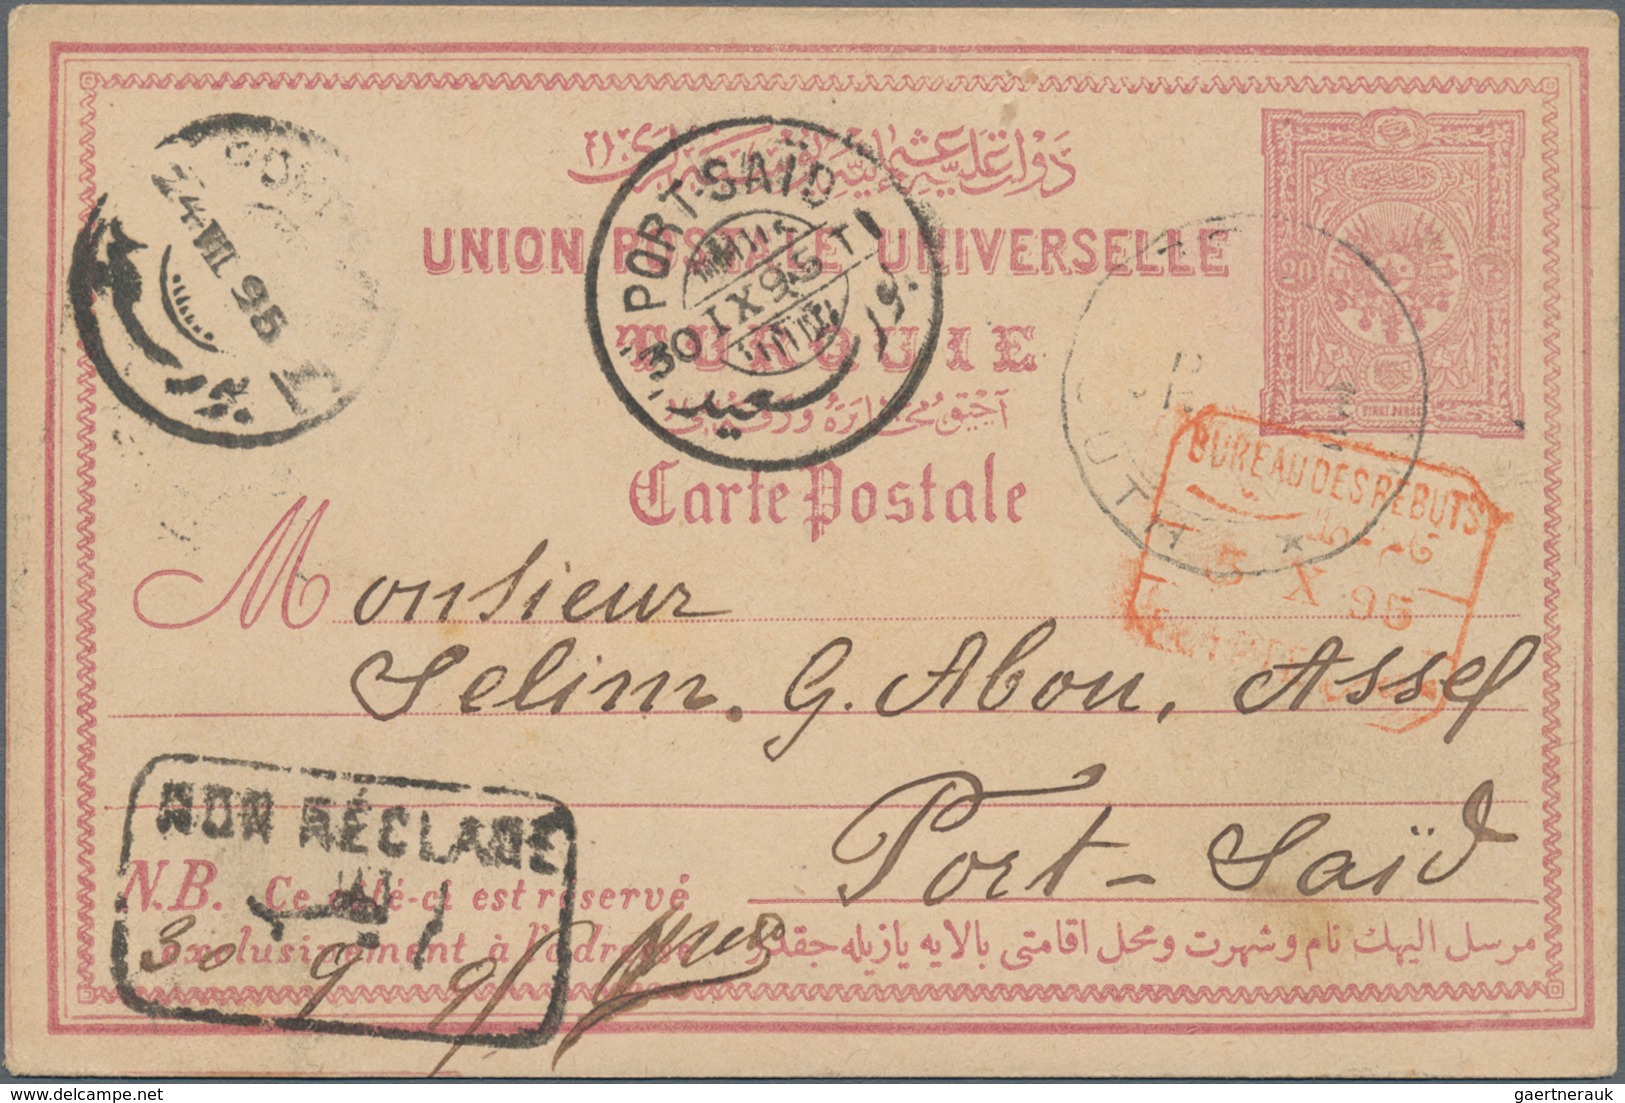 Libanon: 1895, Turkey 20 Para Postal Stationery Card Tied By "BEYROUTH" Cds., To Port Said Egypt Wit - Lebanon